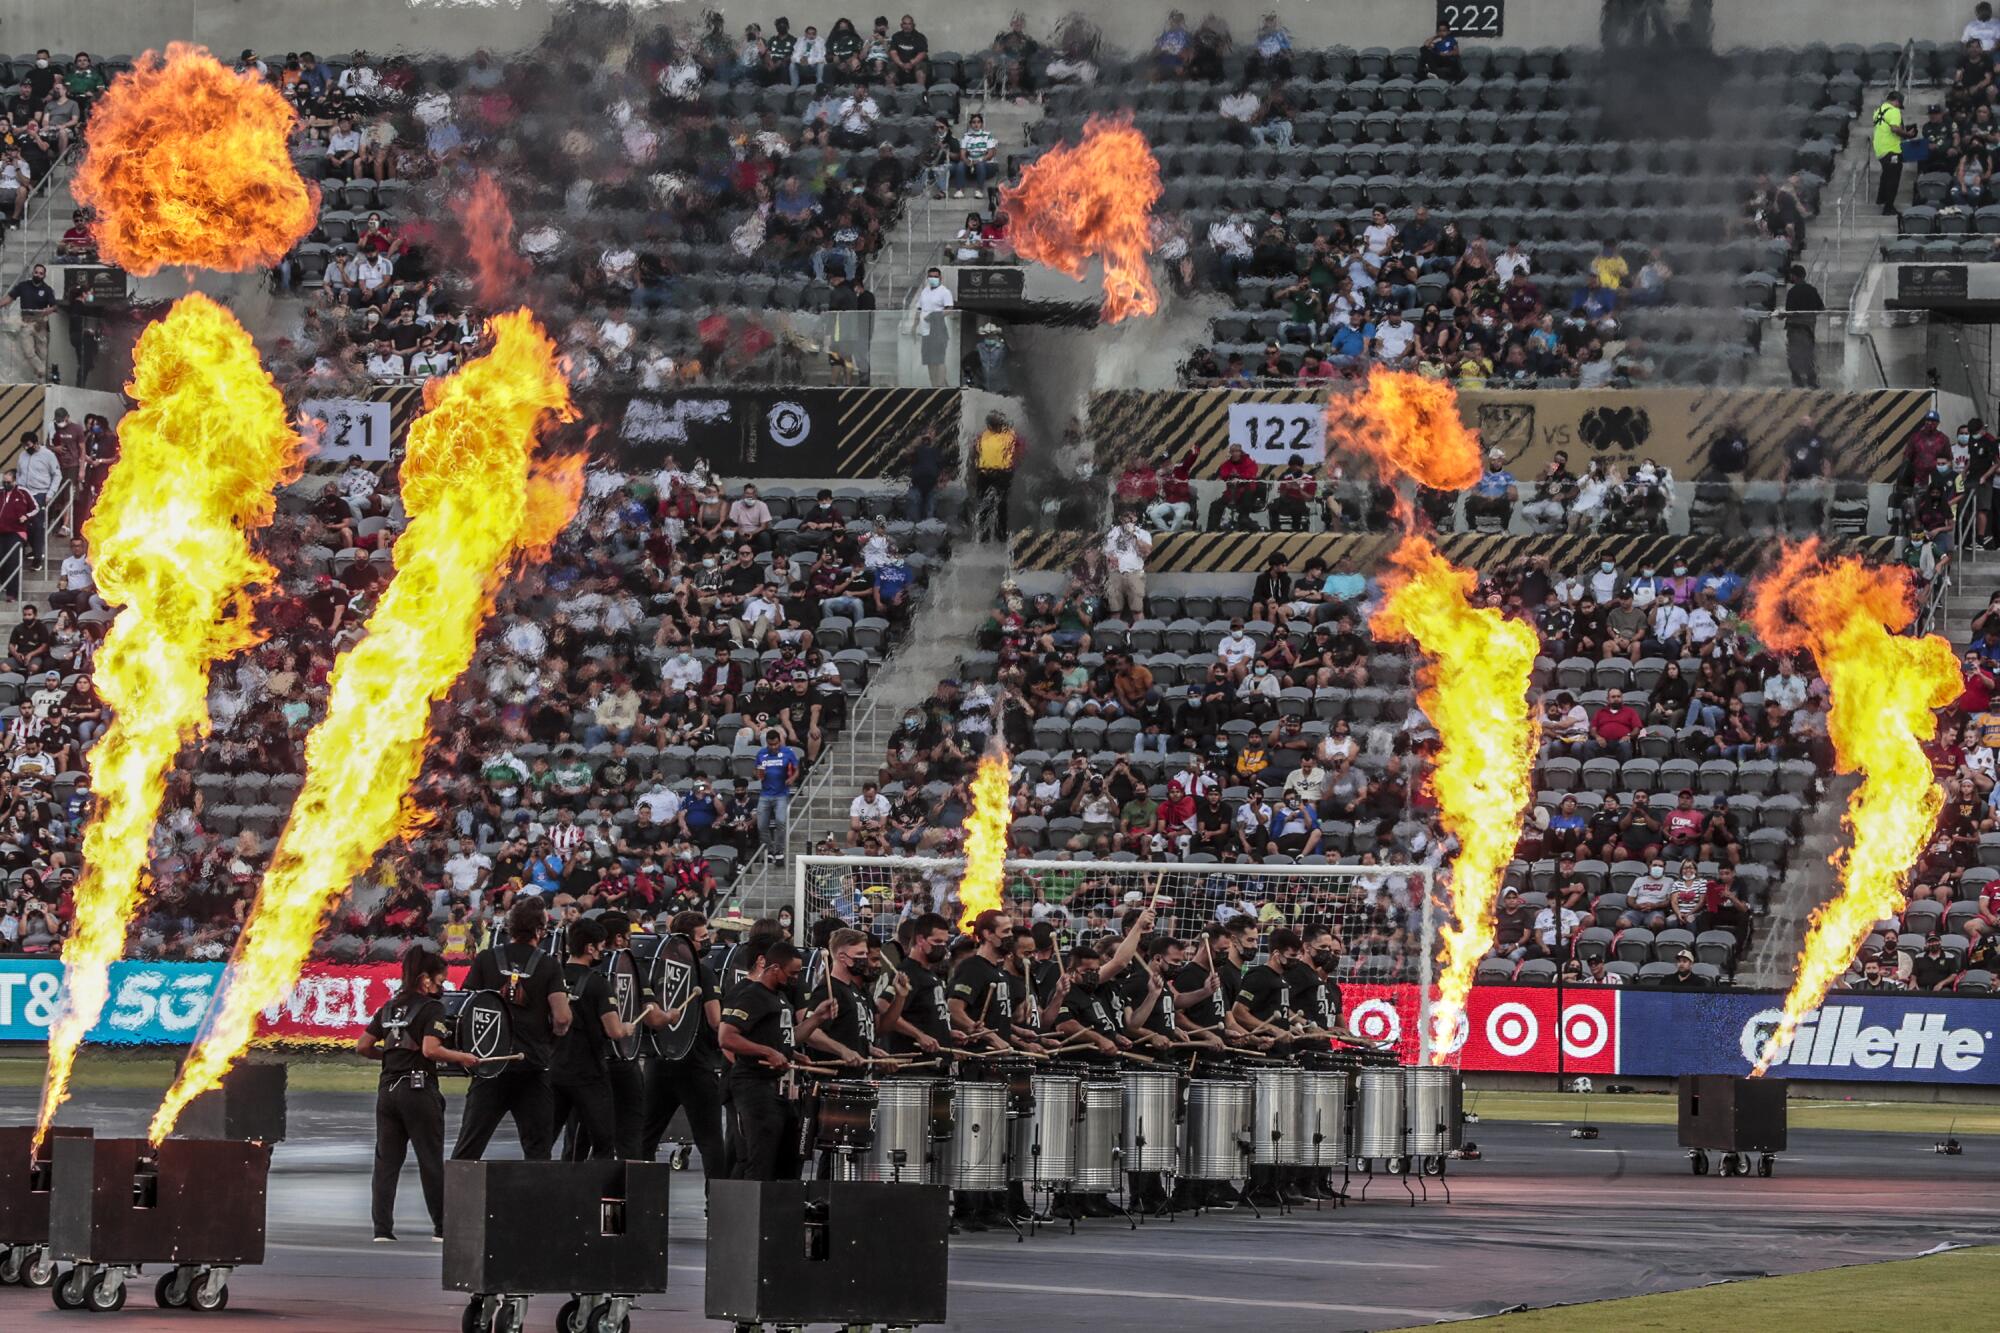 A fiery pregame show featured a phalanx of drummers and flames at the MLS All-Star game